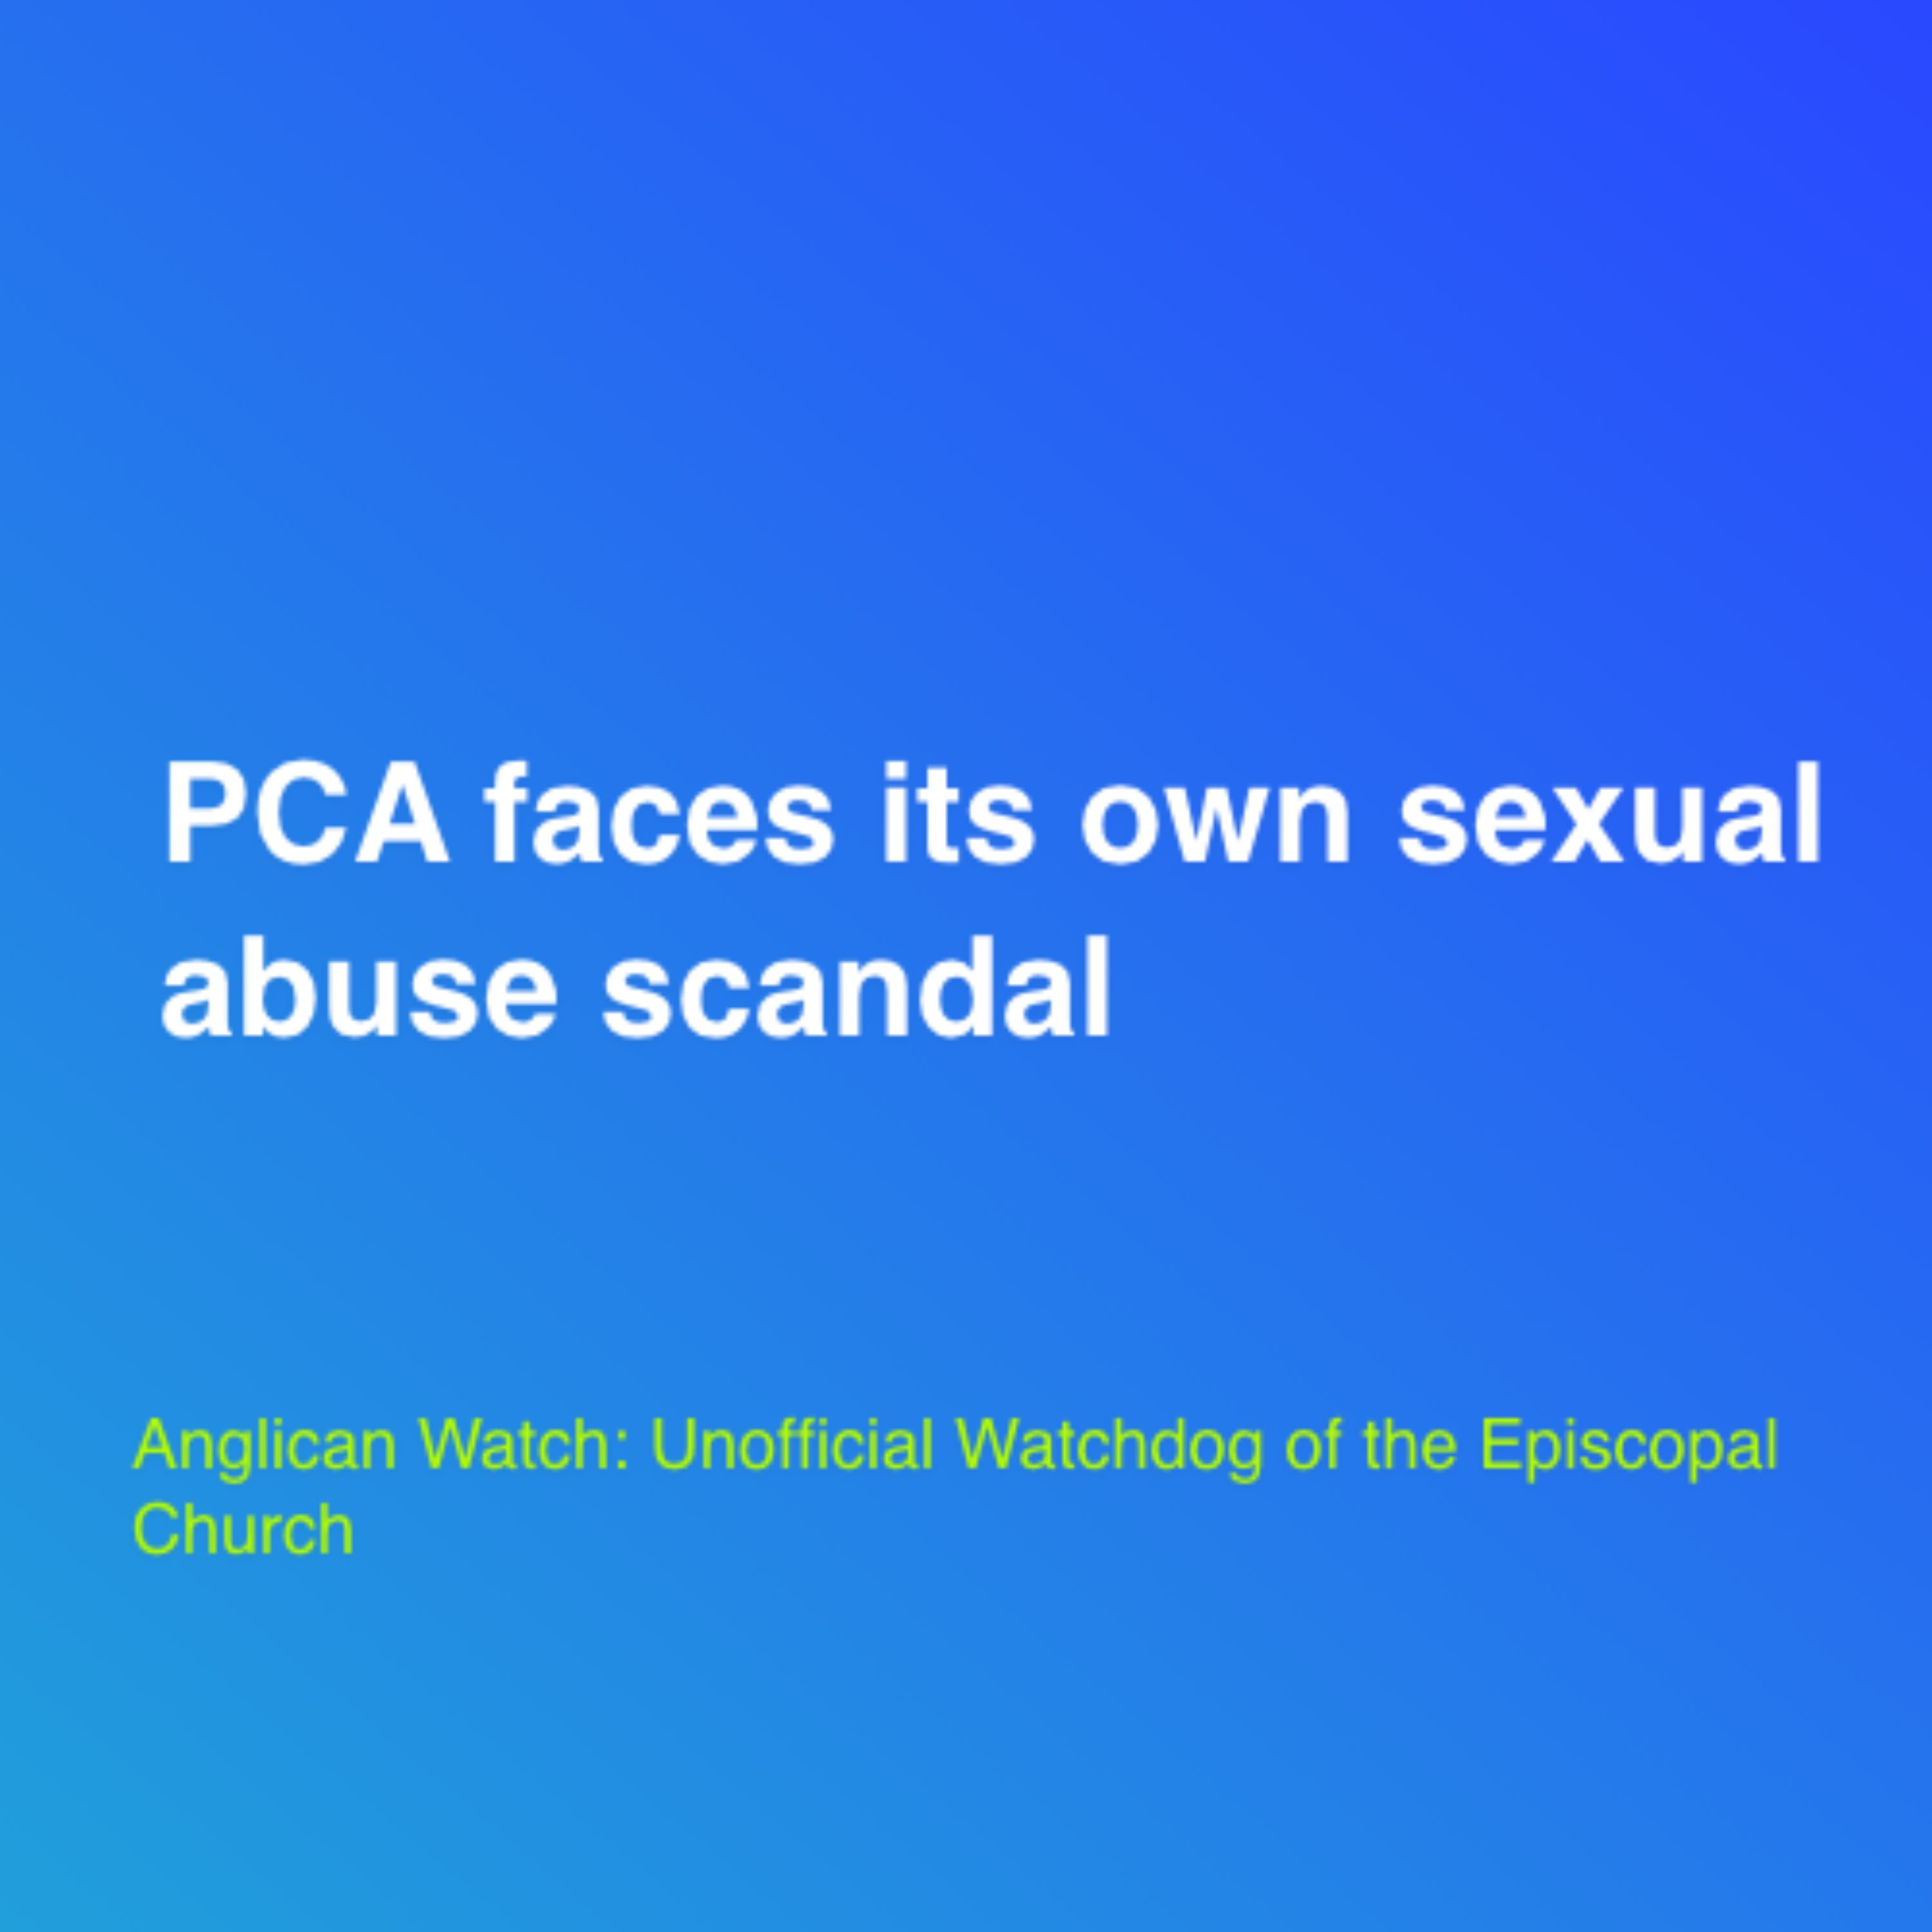 PCA faces its own sexual abuse scandal